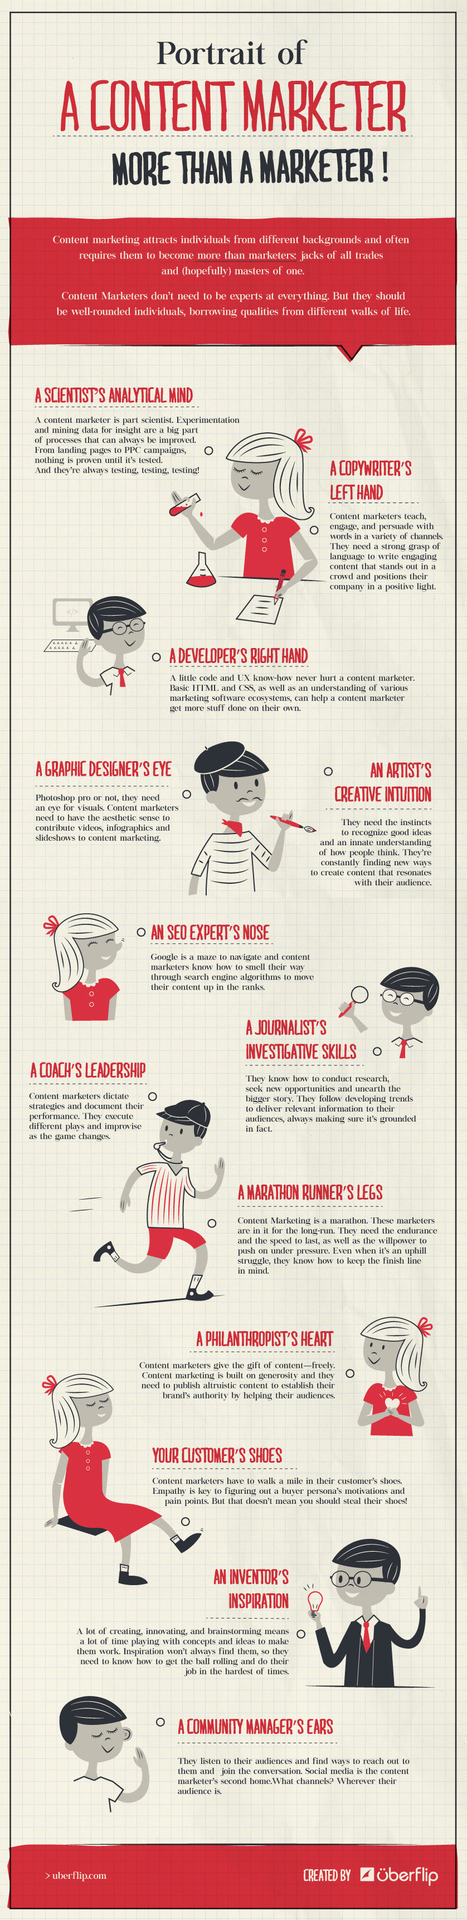 #Infographic: Portrait of a Content Marketer: More Than a Writer | Education 2.0 & 3.0 | Scoop.it